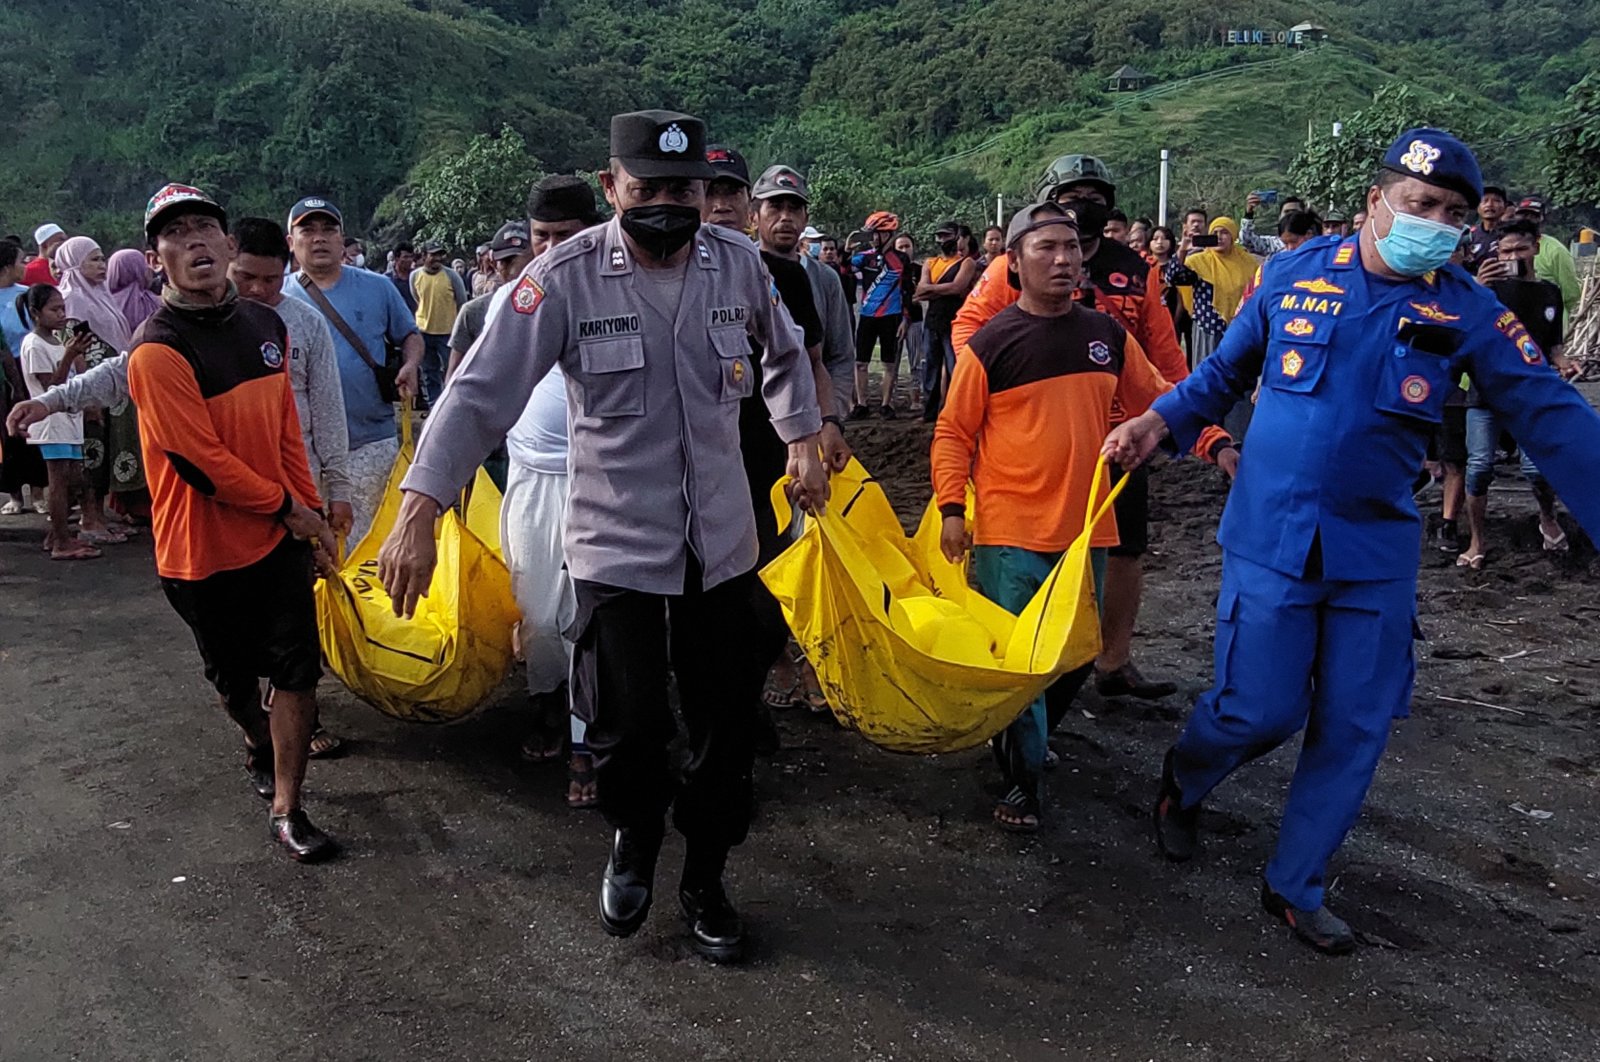 Indonesian members of a search and rescue team transport dead bodies during a search operation following a beach ritual accident that killed 11 people in Jember, East Java, Indonesia, Feb. 13, 2022. (AFP Photo)